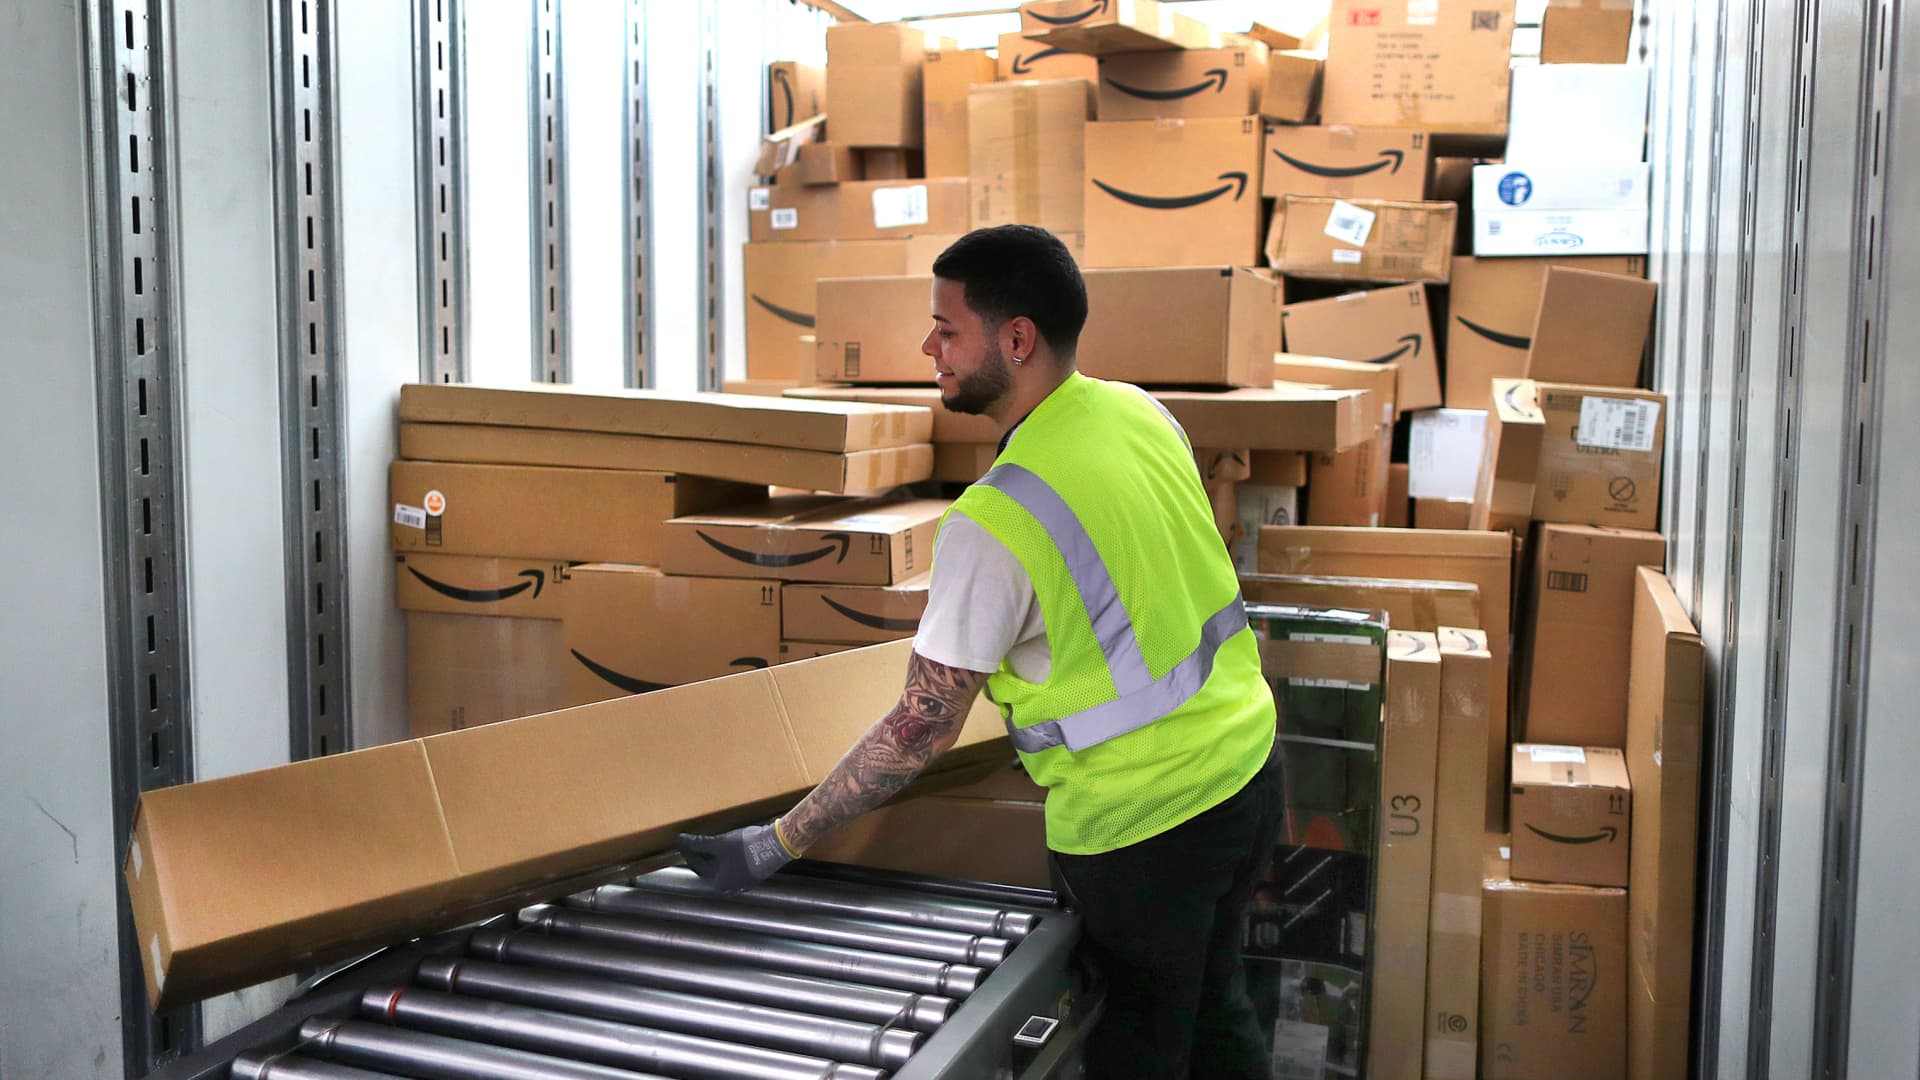 Amazon to hire 75,000 more workers as demand rises due to coronavirus